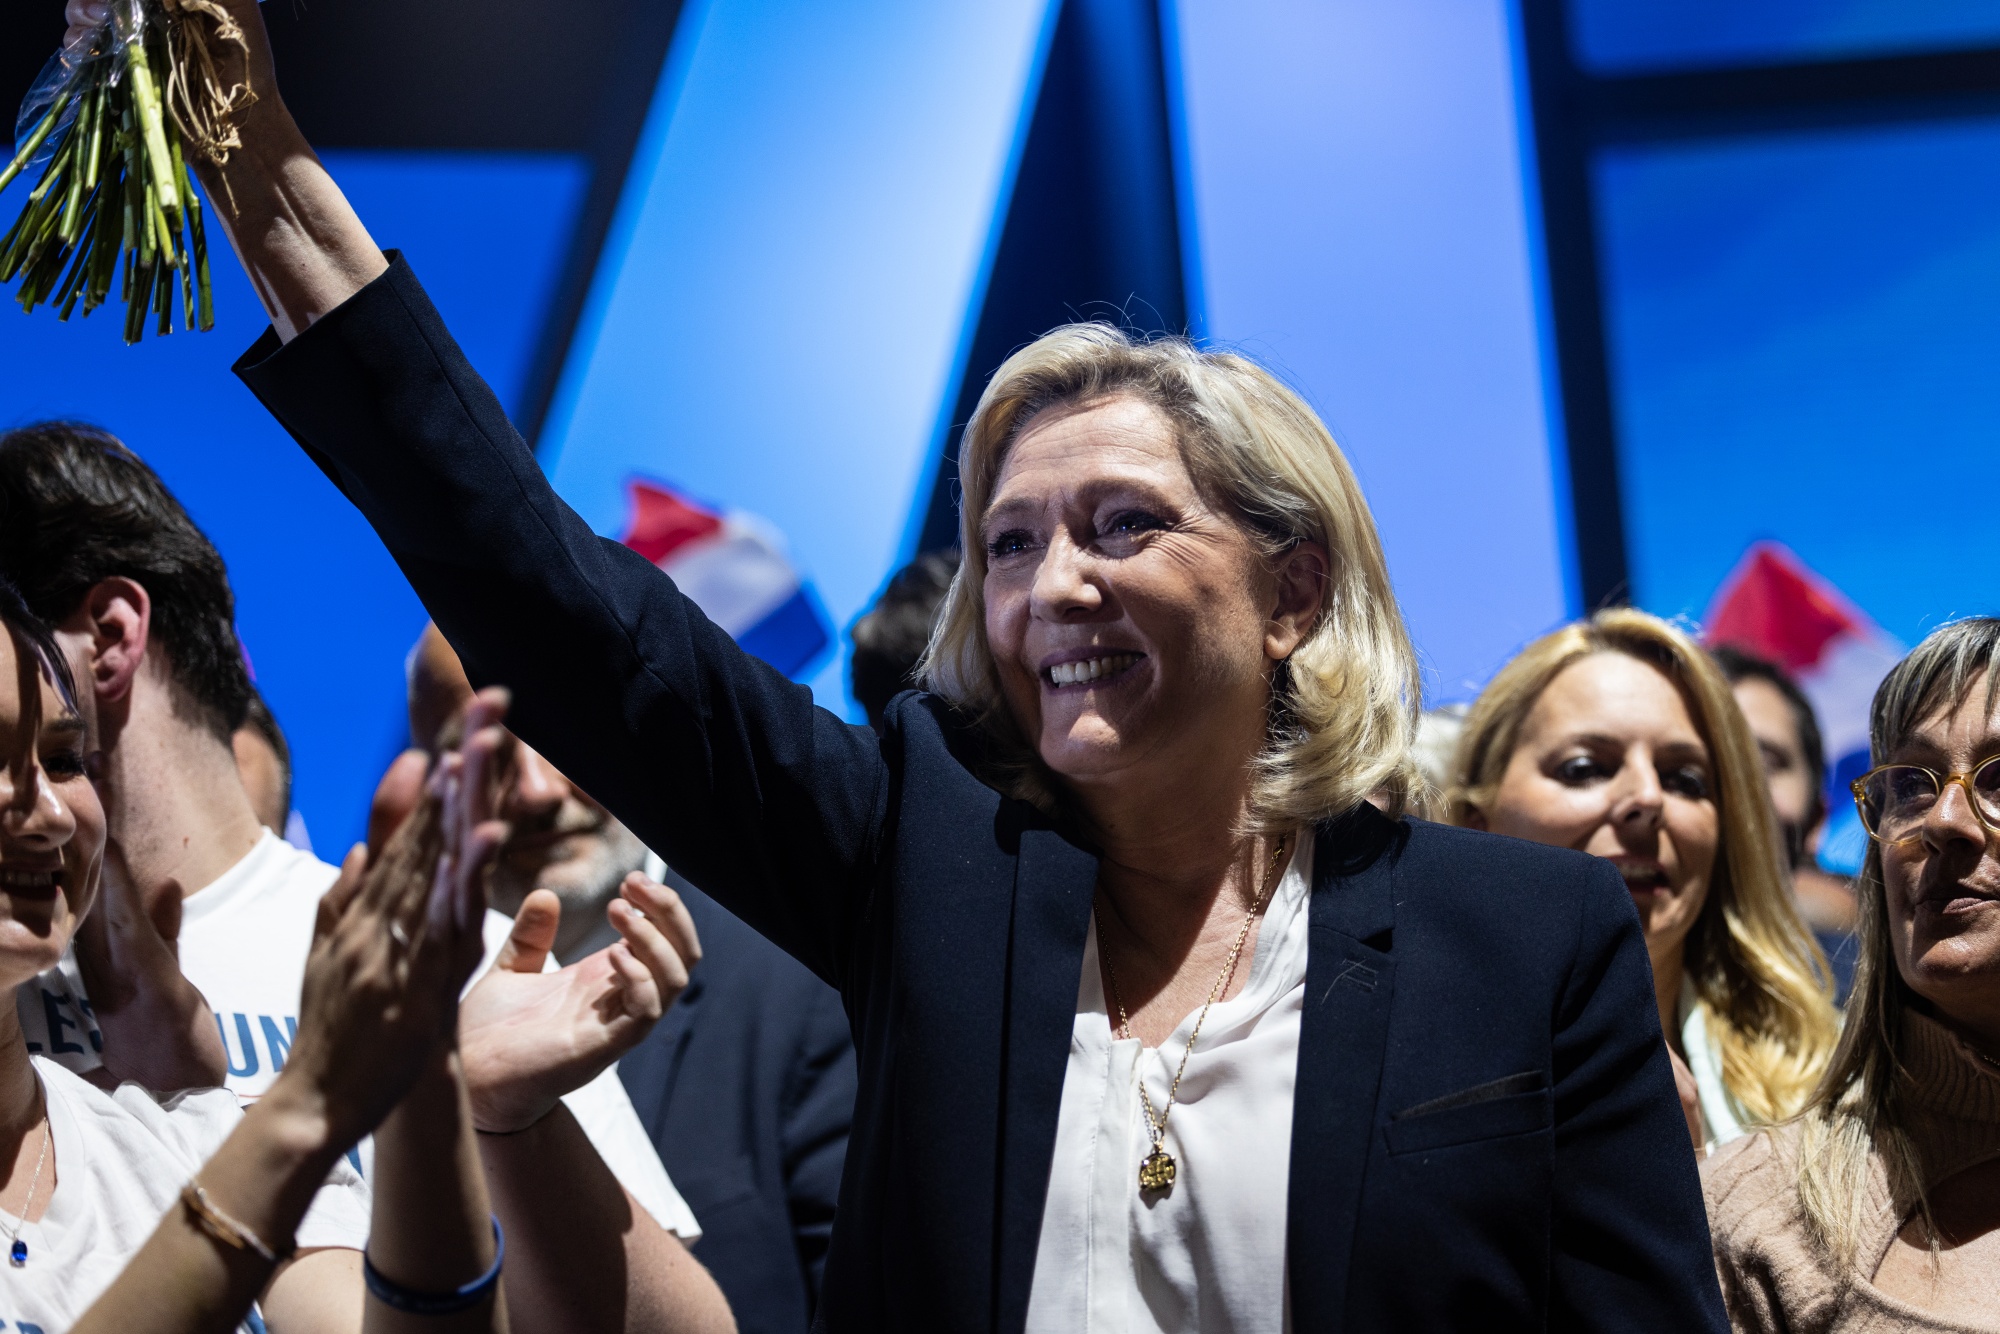 French Poll Finds Far-Right Le Pen Is More Popular Than Macron